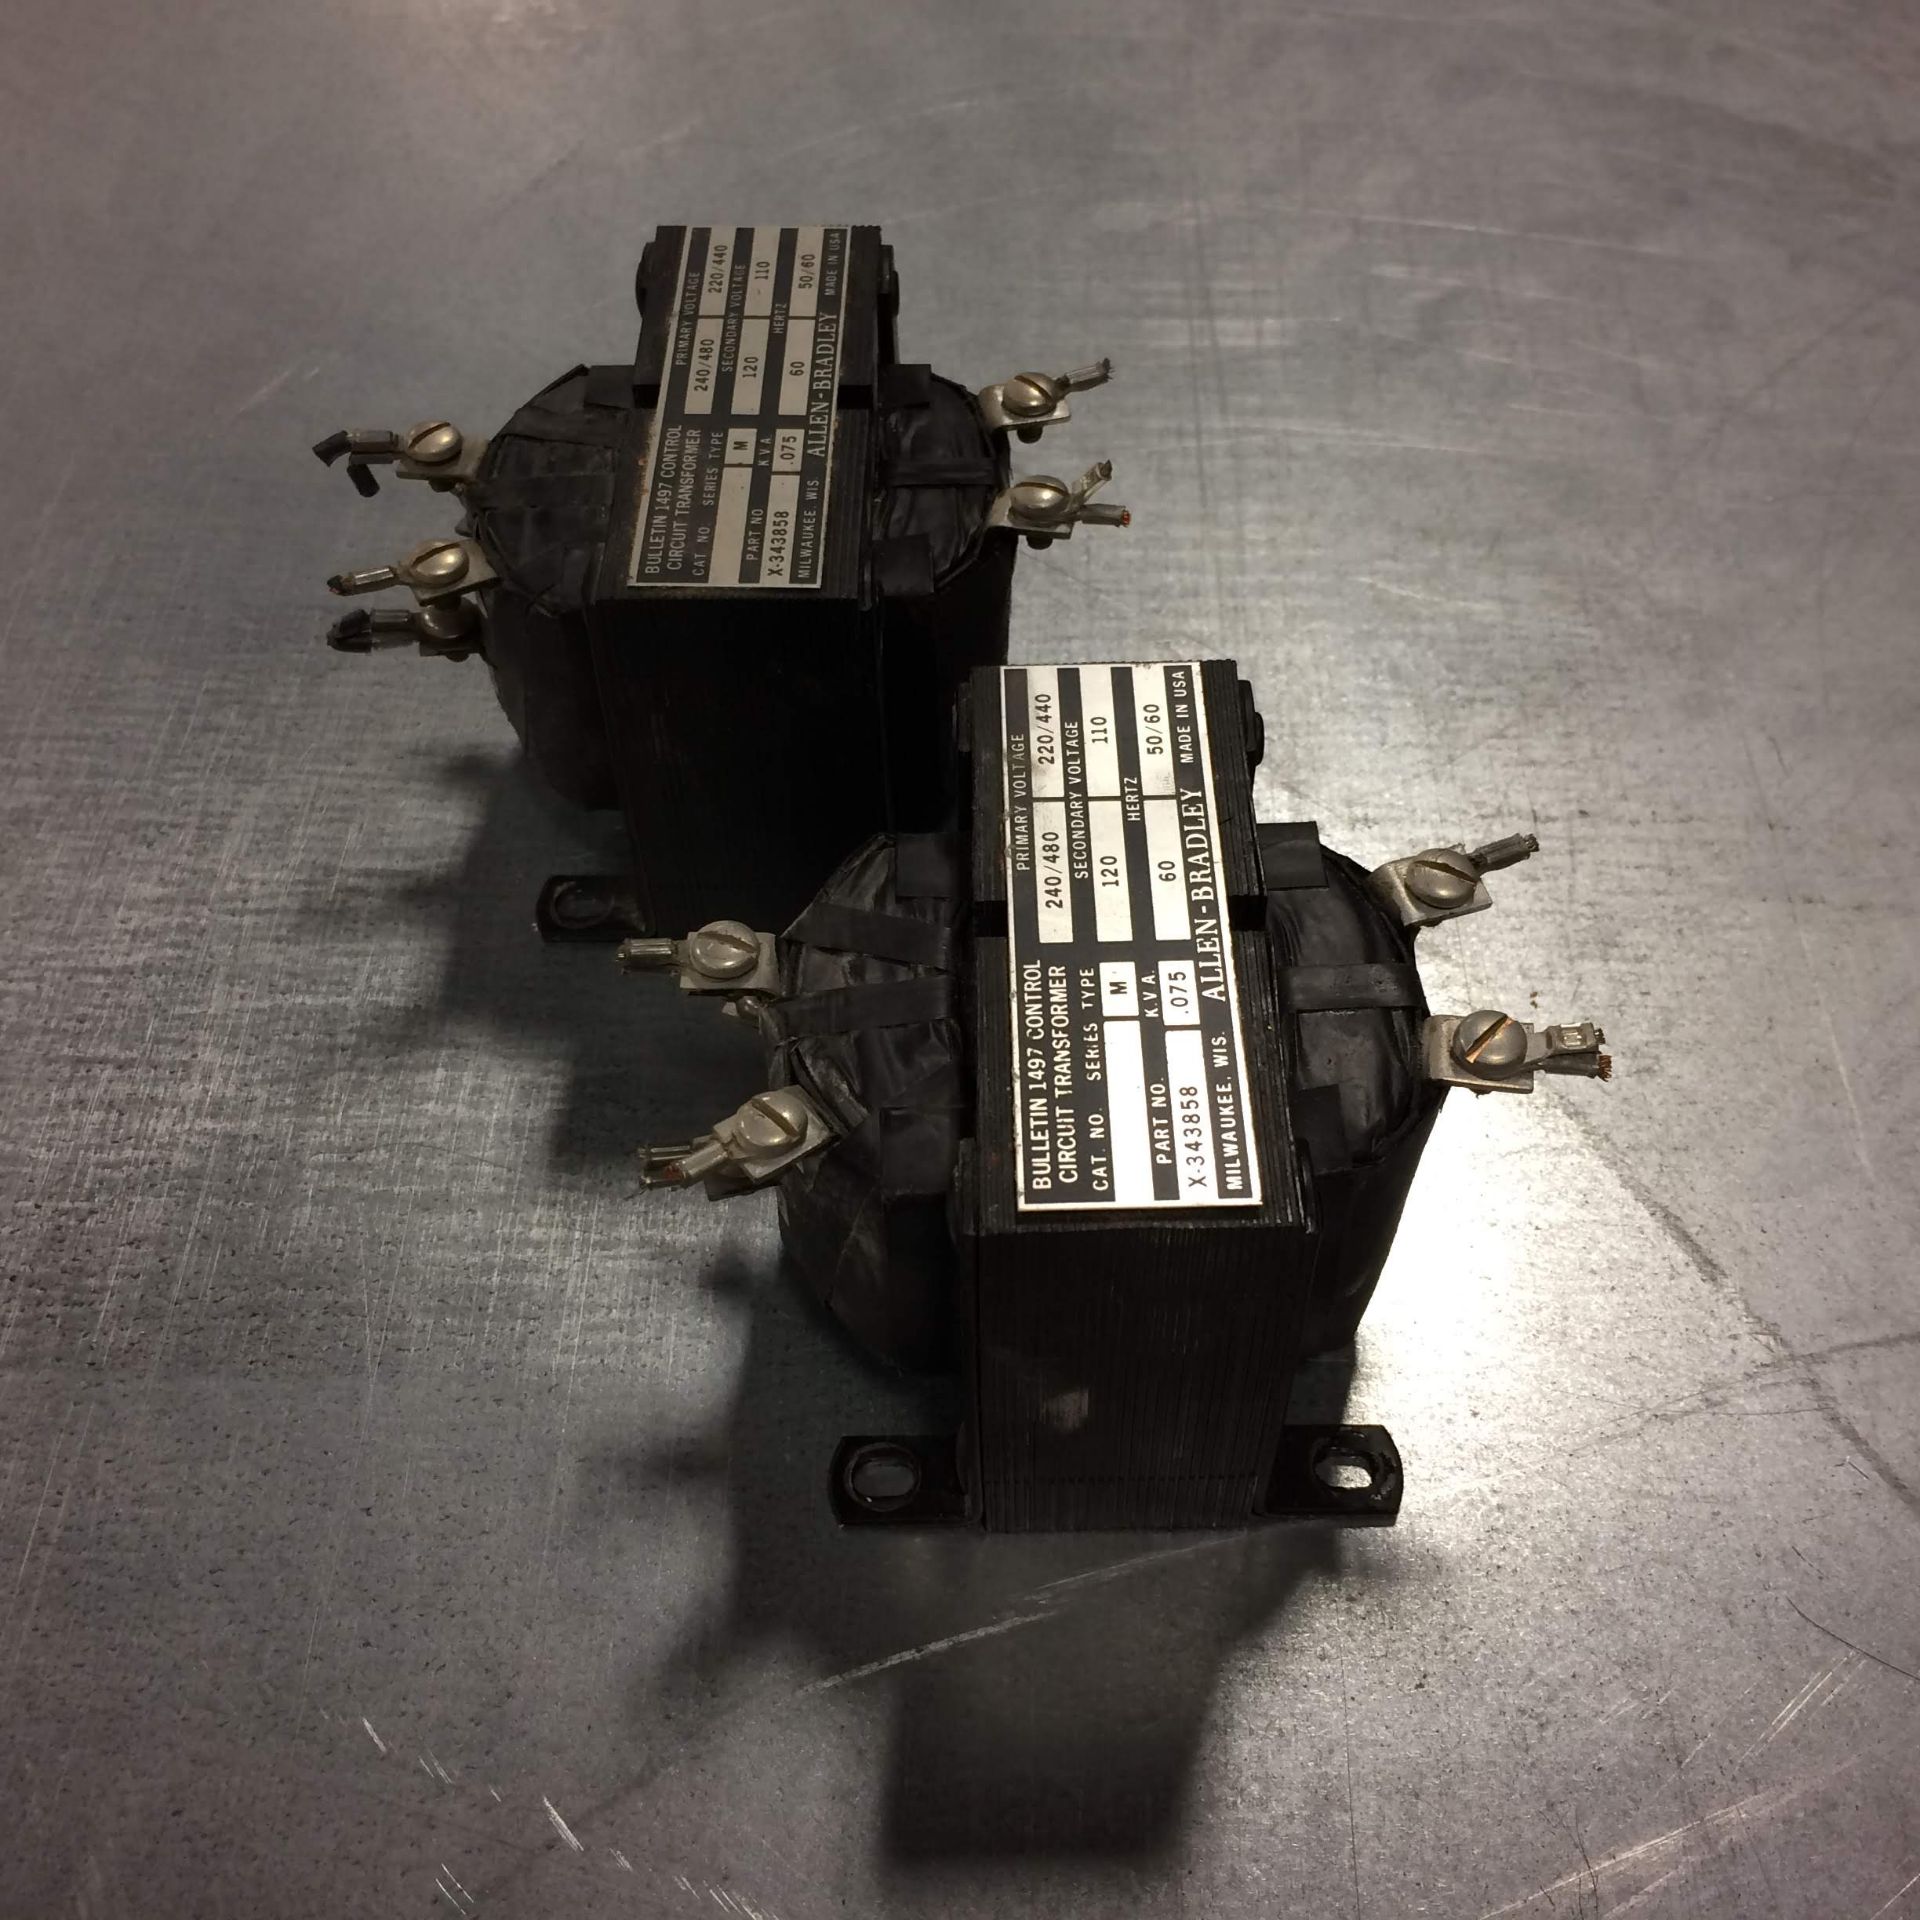 (2) X-343858 ALLEN BRADLEY TRANSFORMERS USED. Pickup your lot(s) for free! Shipping is available for - Image 4 of 5